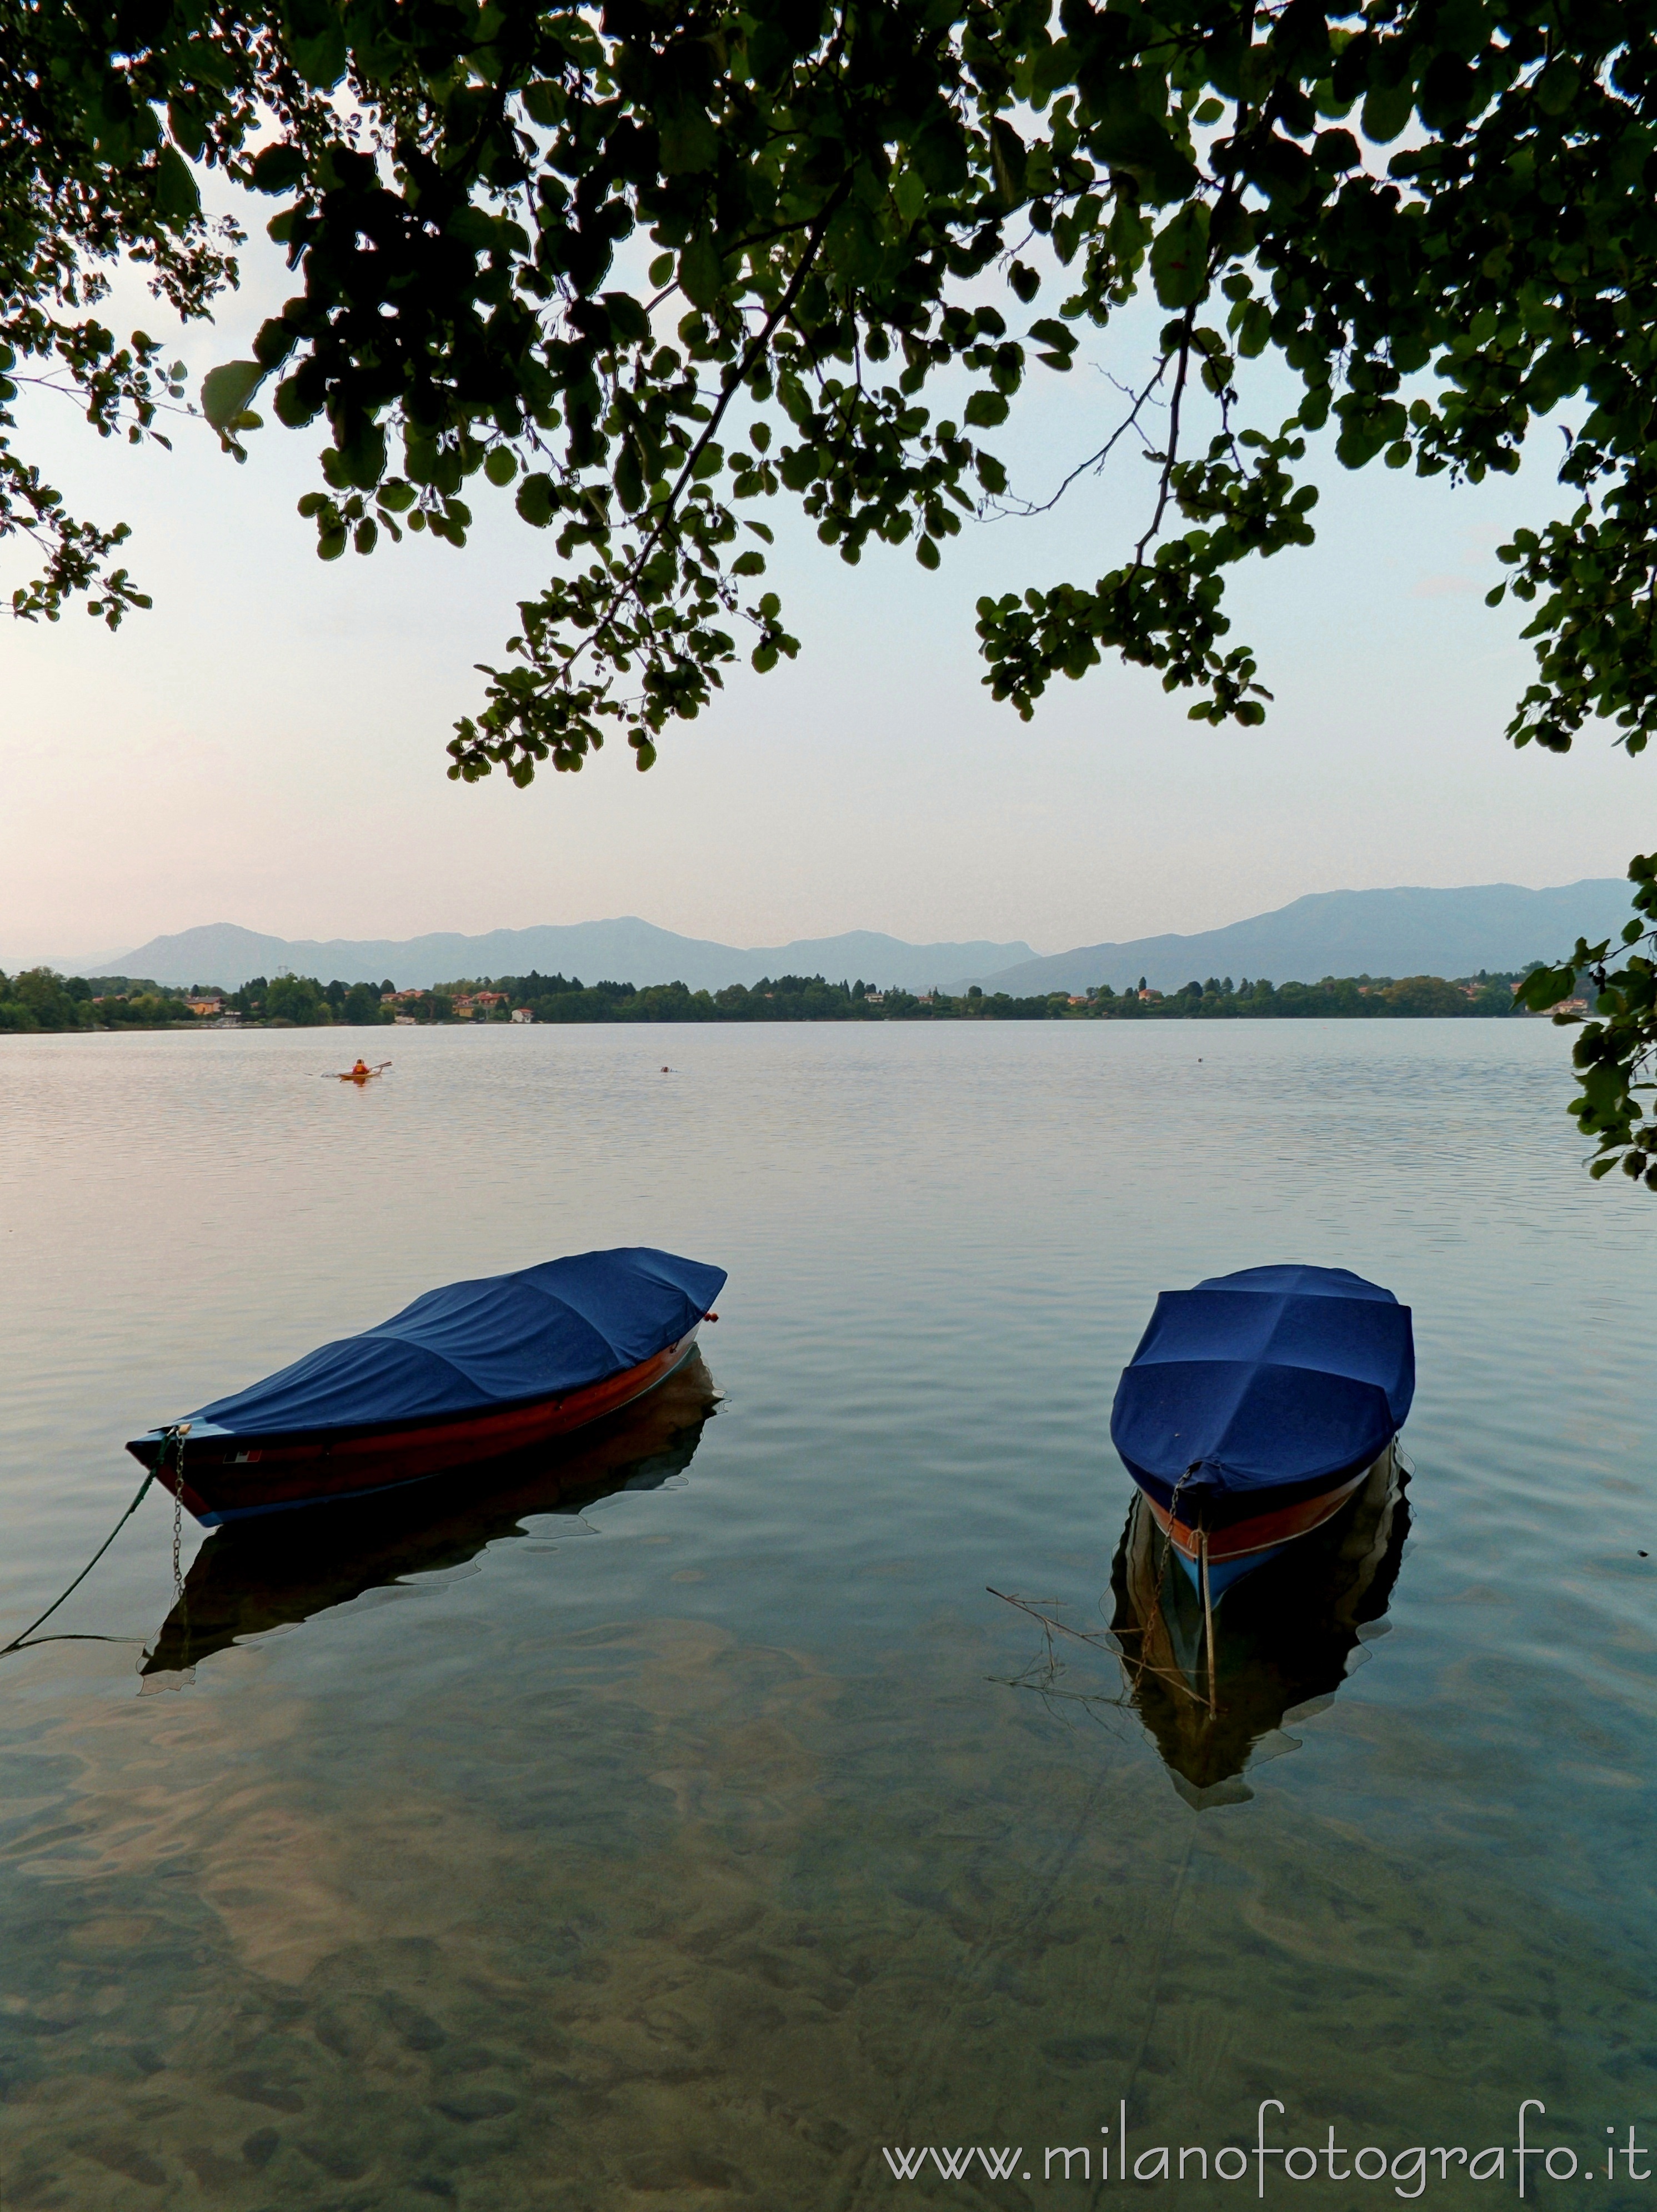 Cadrezzate (Varese, Italy): Two boats moored in Lake Monate at darkening - Cadrezzate (Varese, Italy)